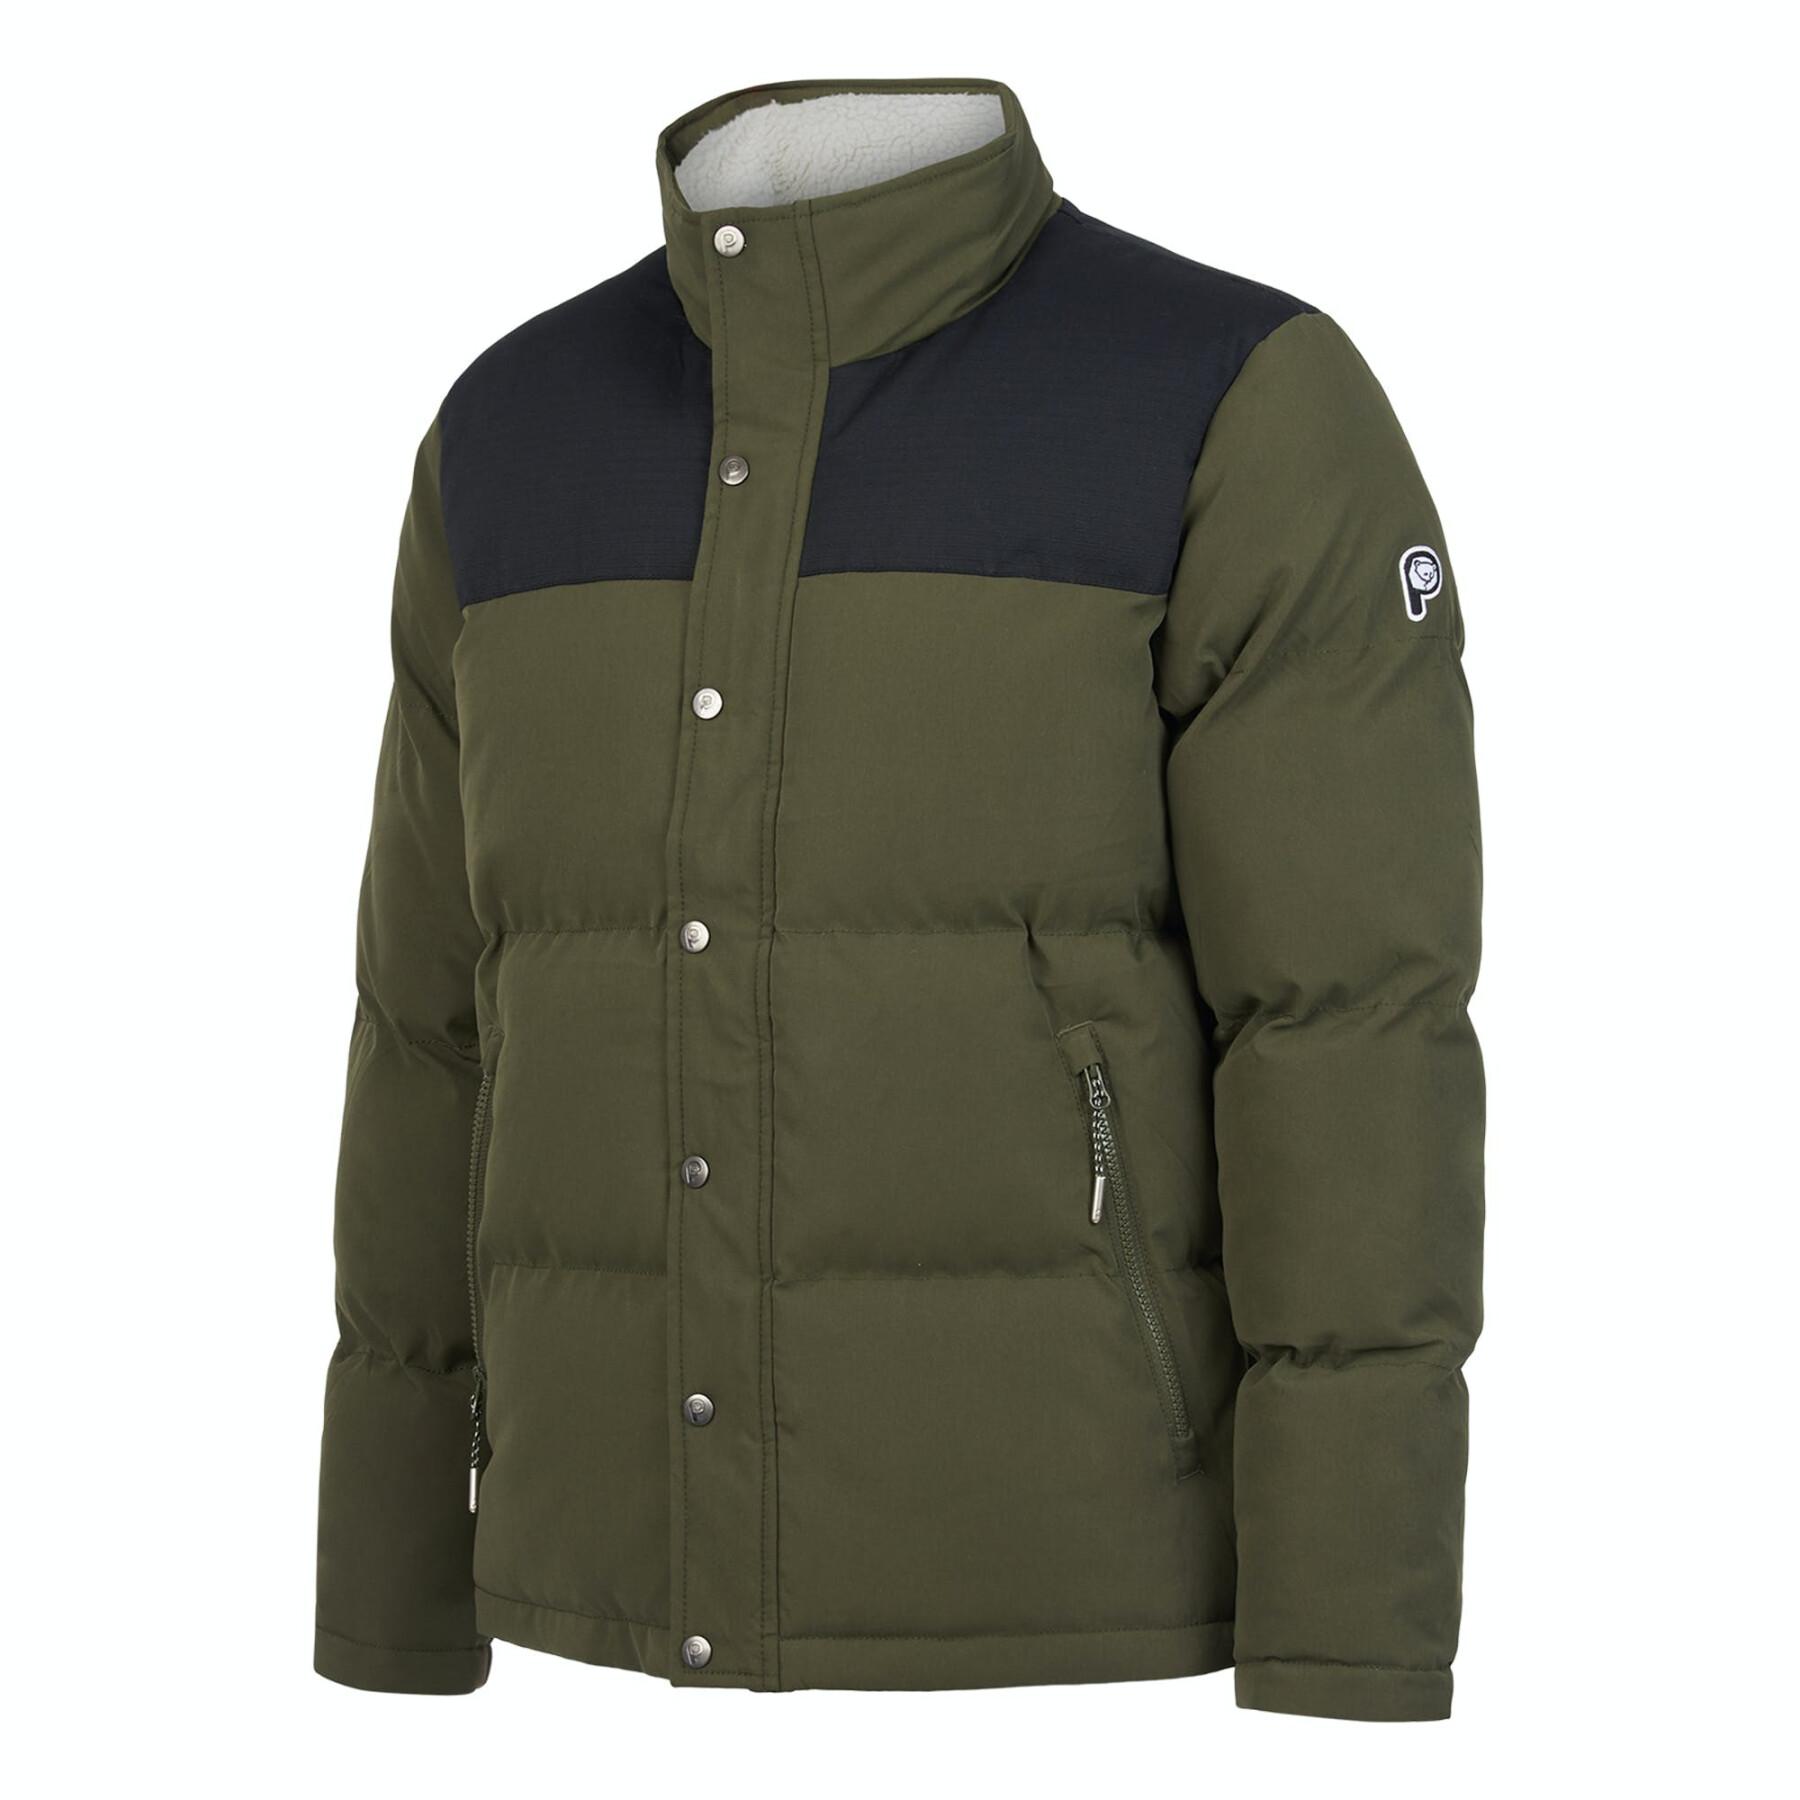 Quilted jacket with funnel neck Penfield bear cut and sew